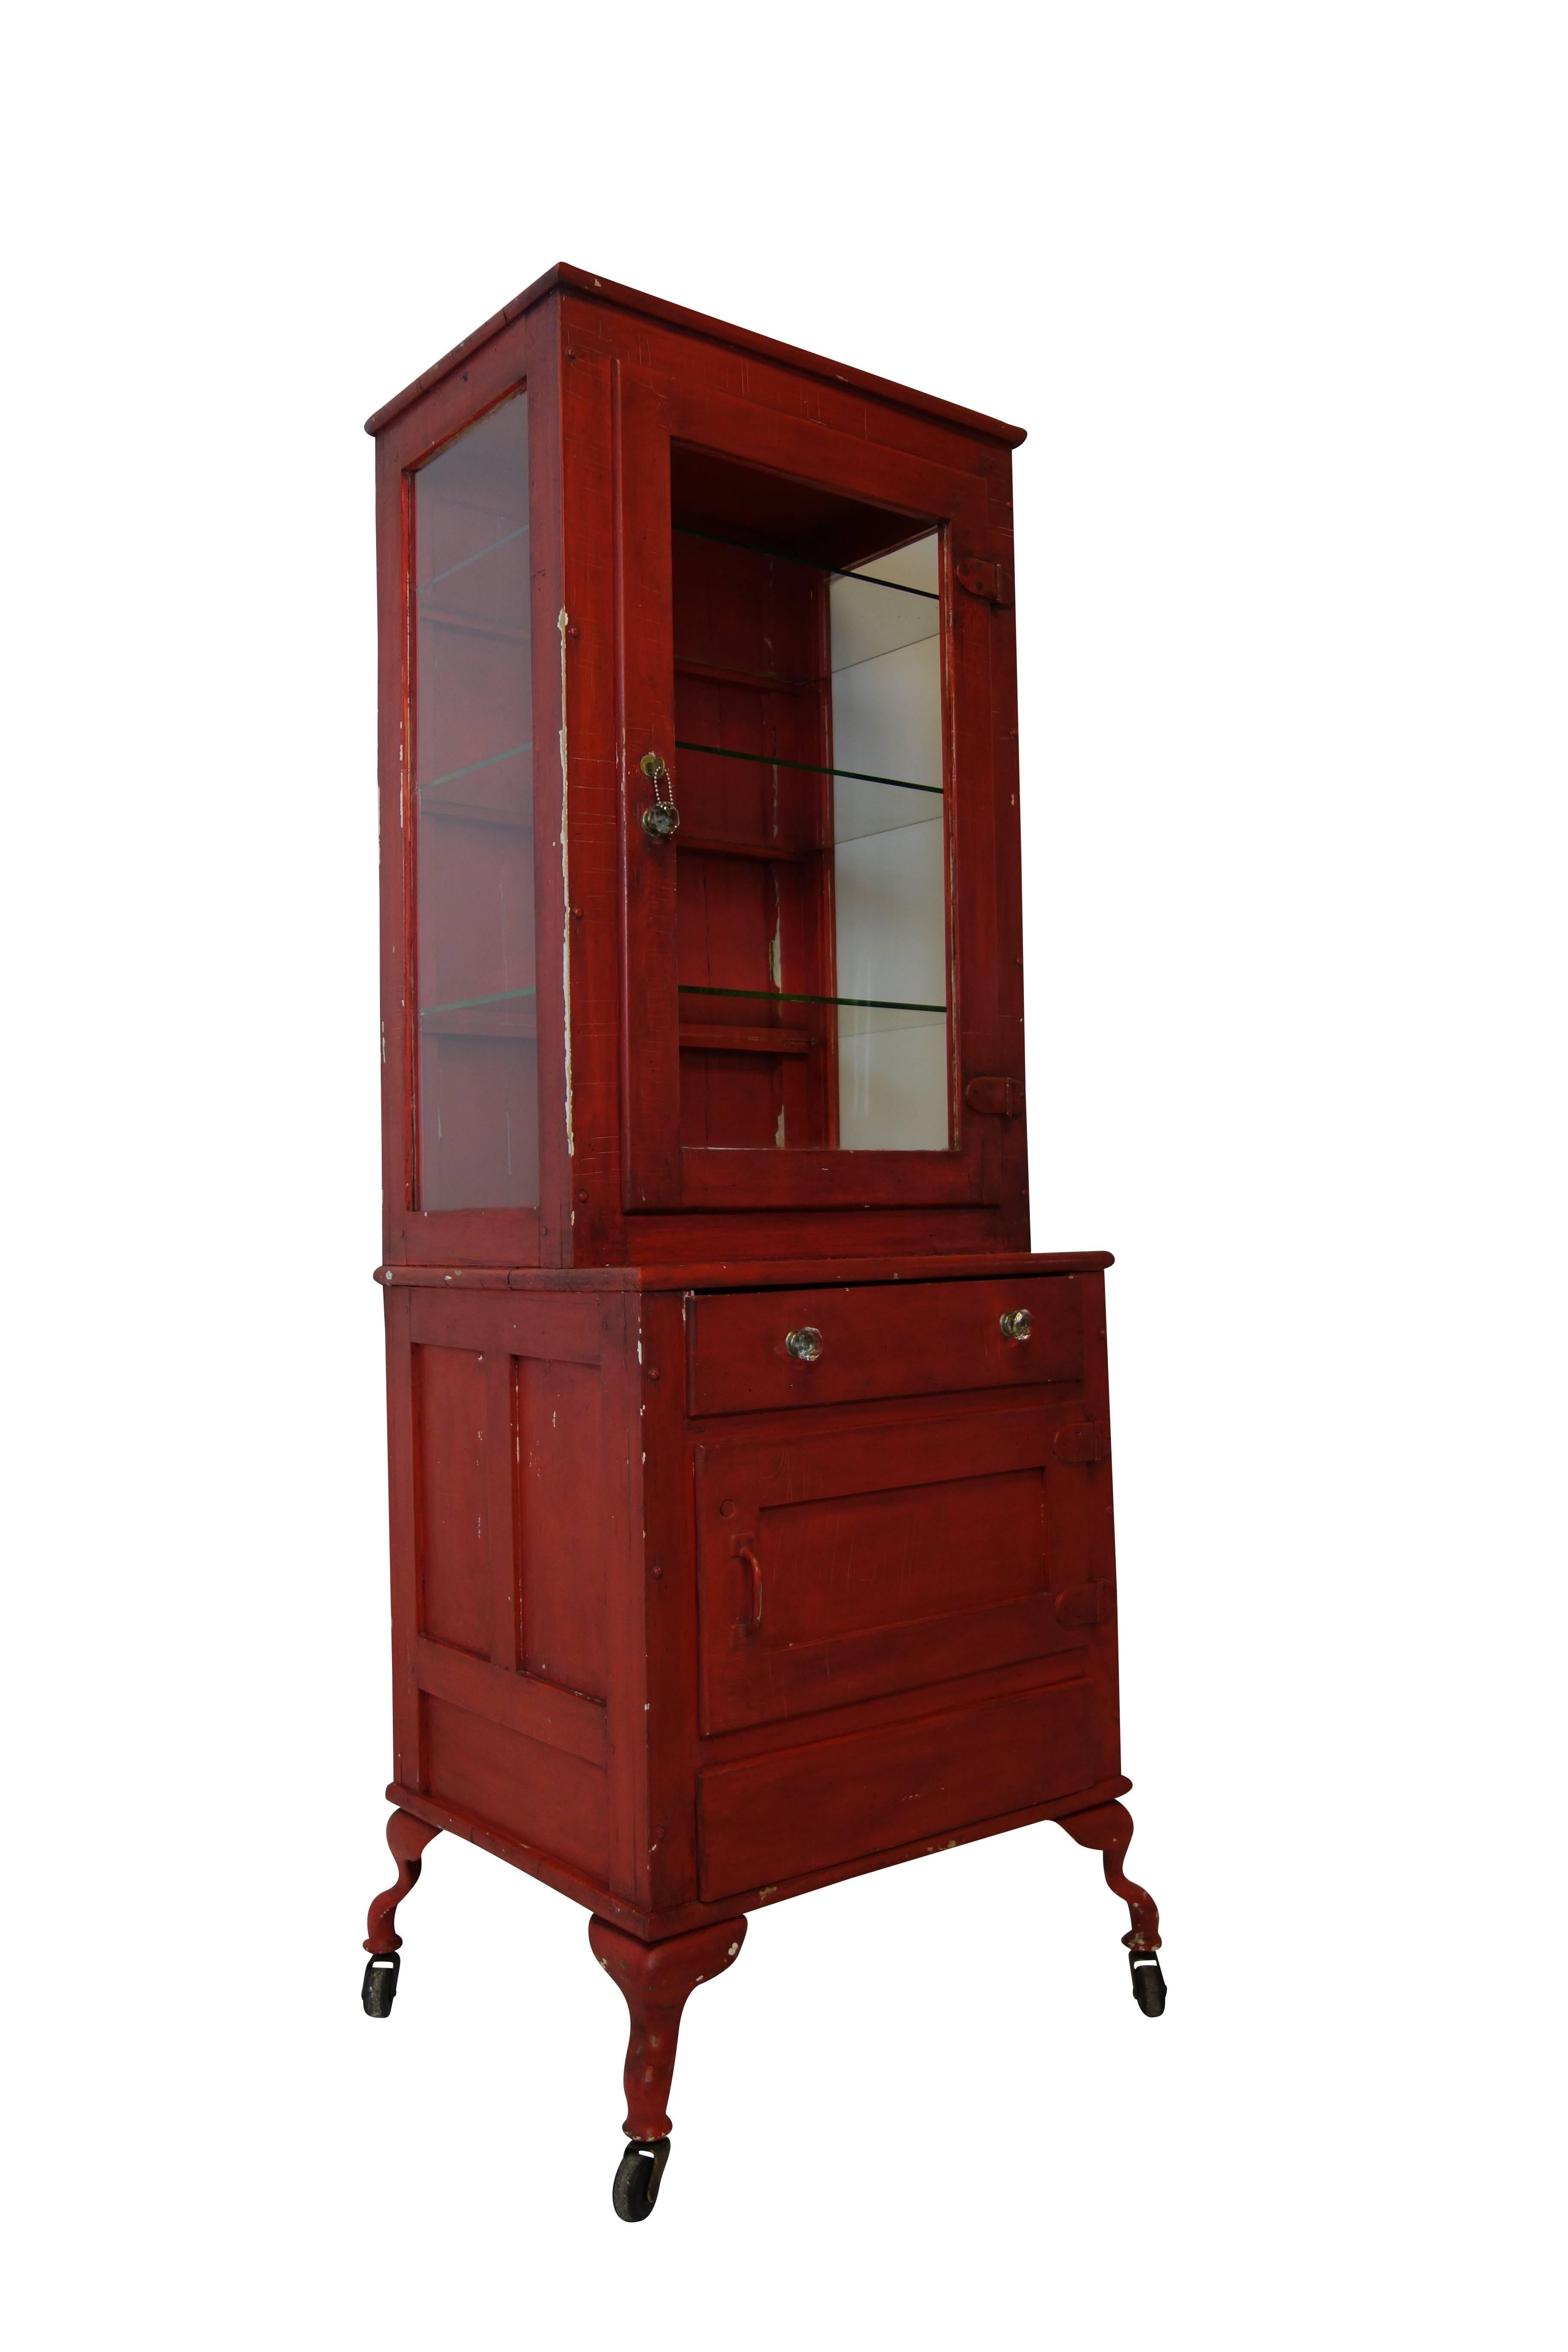 This is a unique red painted medical cabinet with cabriole legs on casters. The set back three-sided glass display has the original lock and key. The lower portion has a hinged cabinet space for storage and two drawers. The bottom drawer appears to